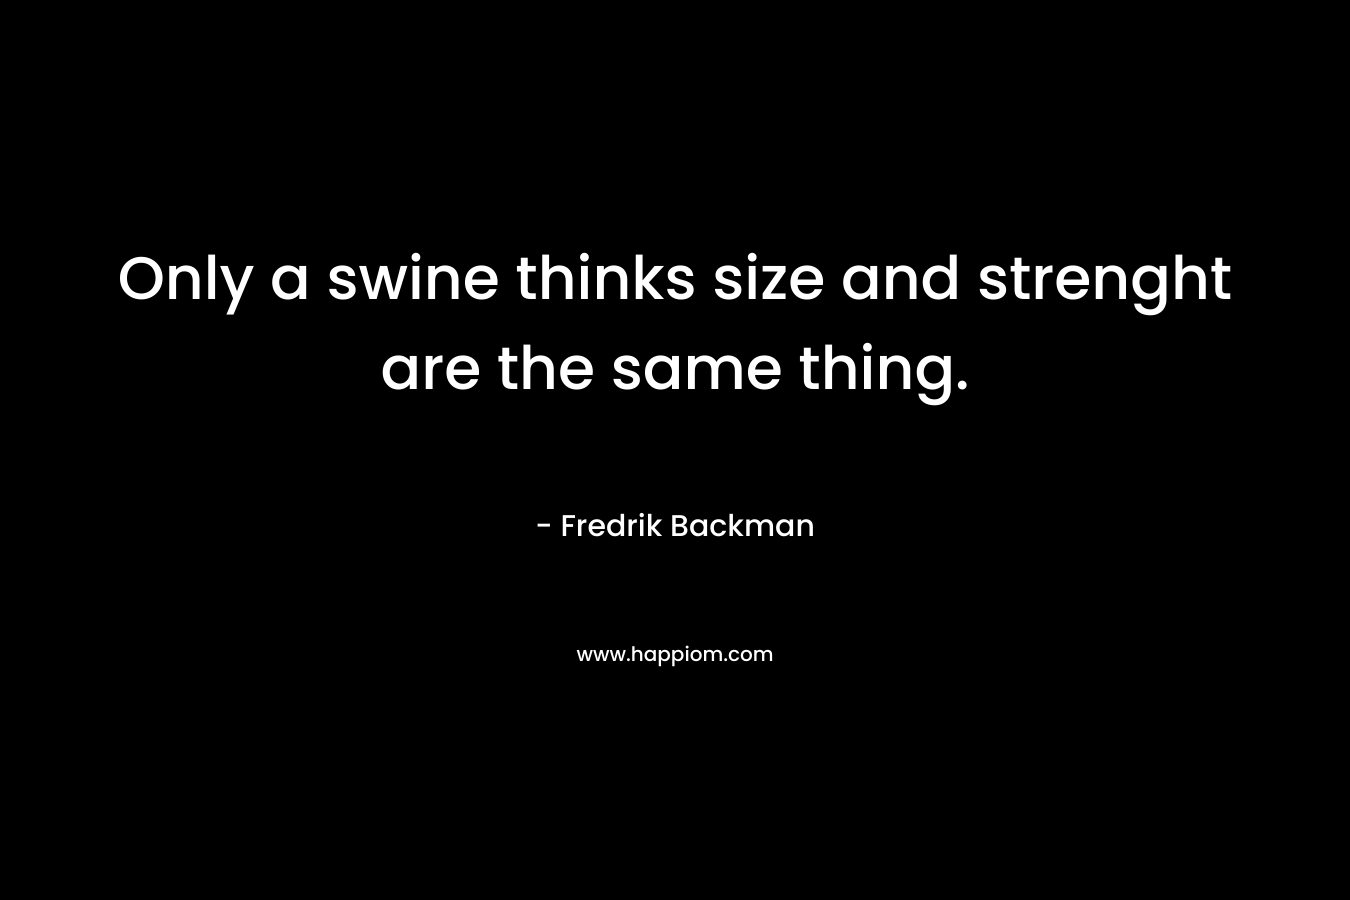 Only a swine thinks size and strenght are the same thing.